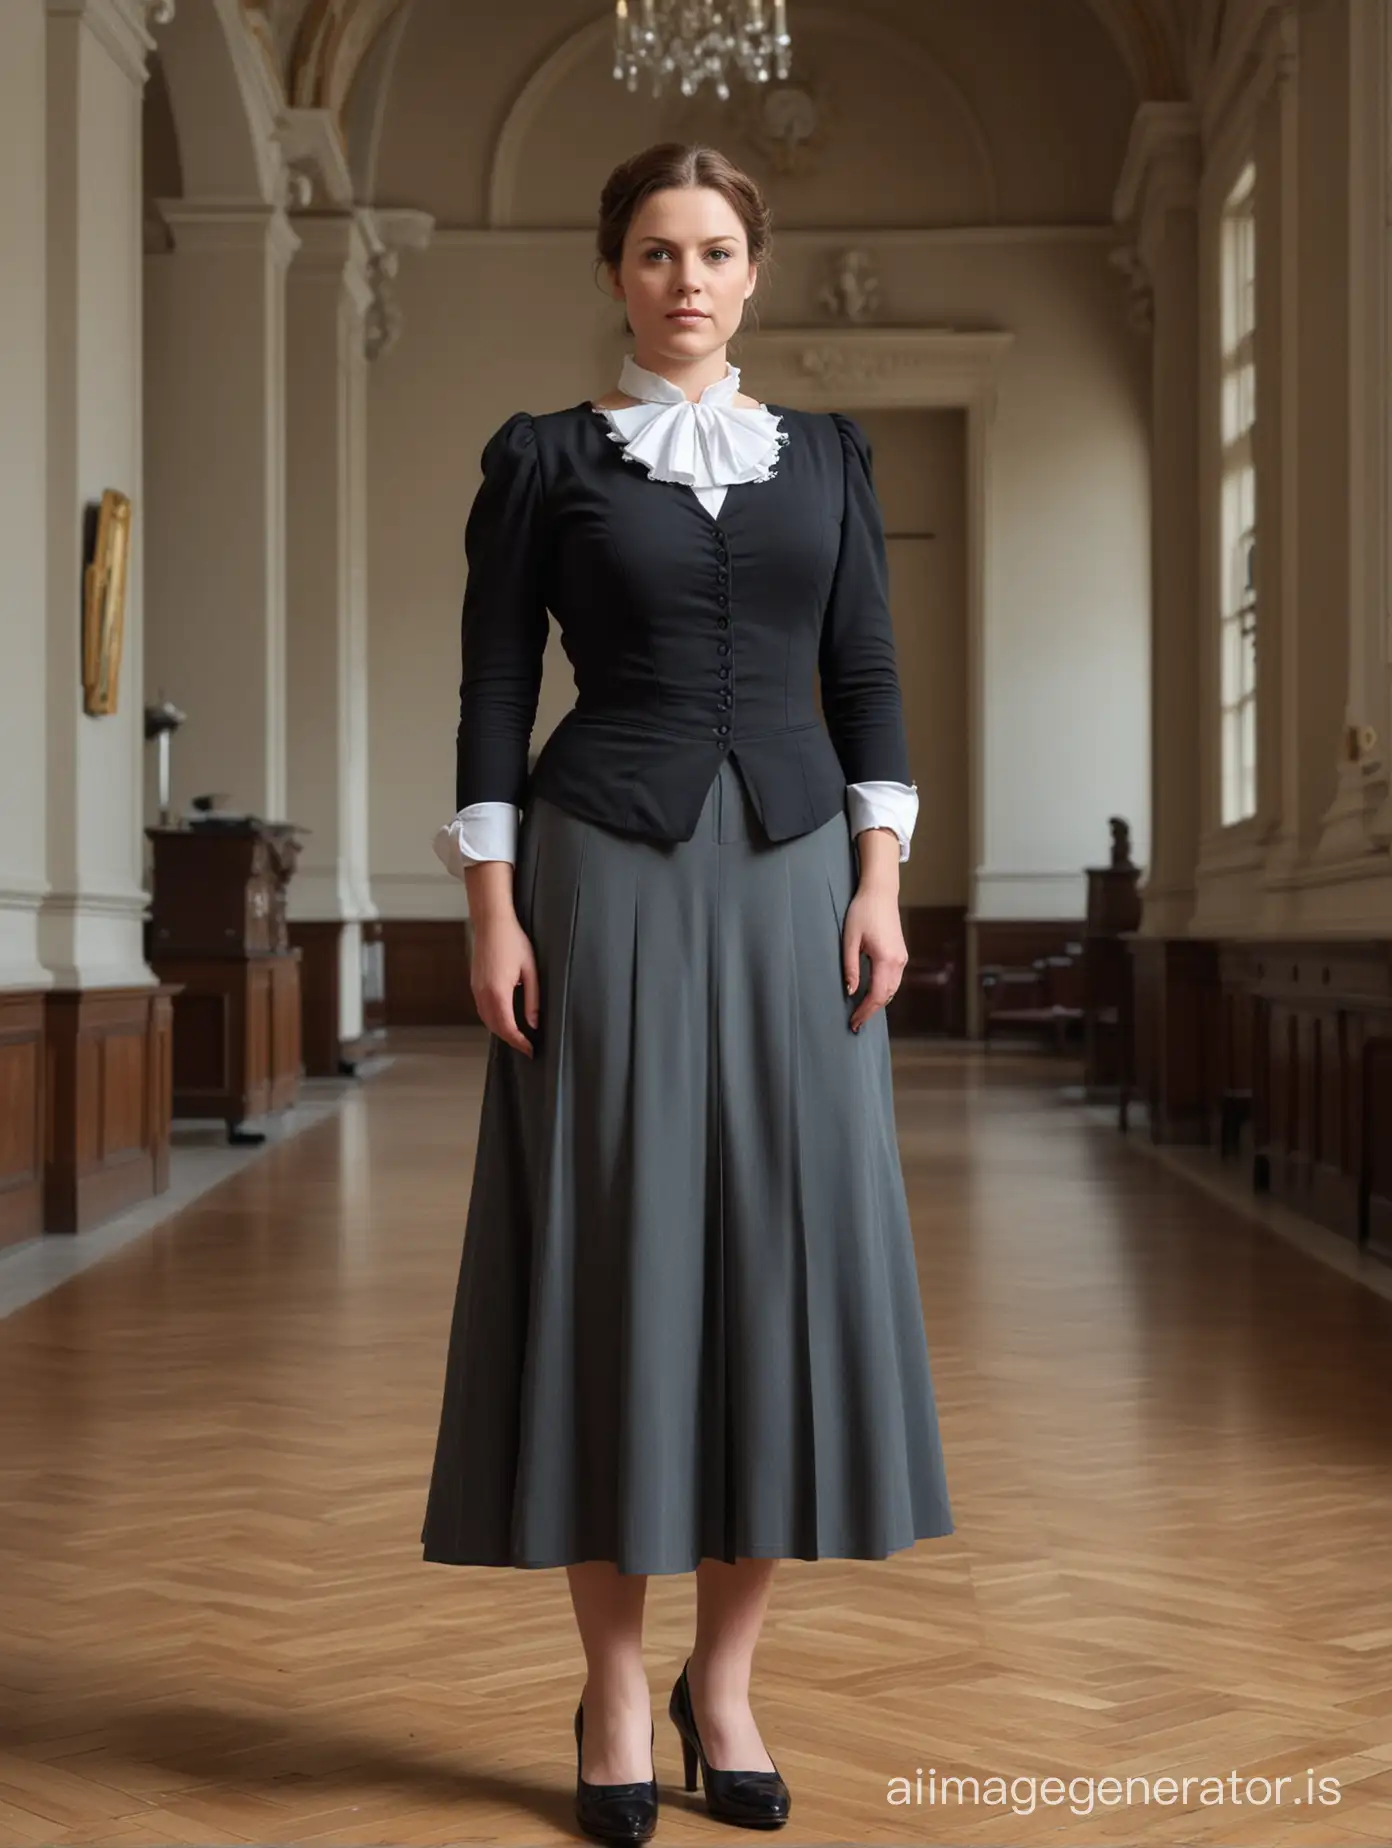 Serious-German-Governess-Stands-in-Hallway-Holding-Razor-Strap